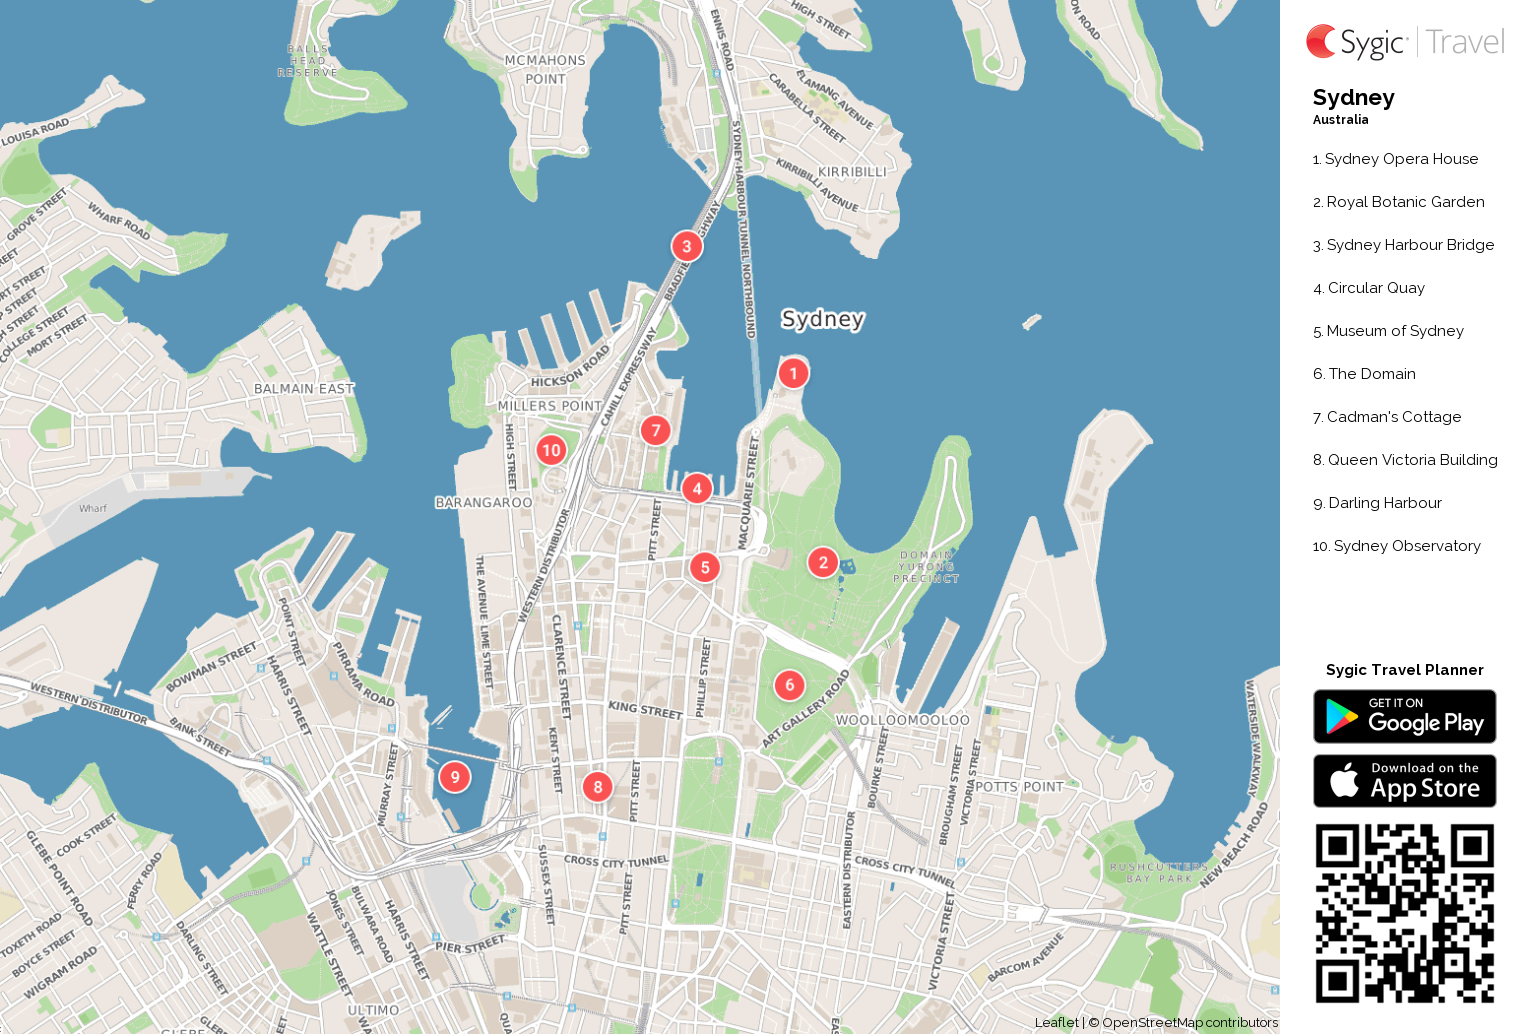 map of sydney attractions Sydney Printable Tourist Map Sygic Travel map of sydney attractions